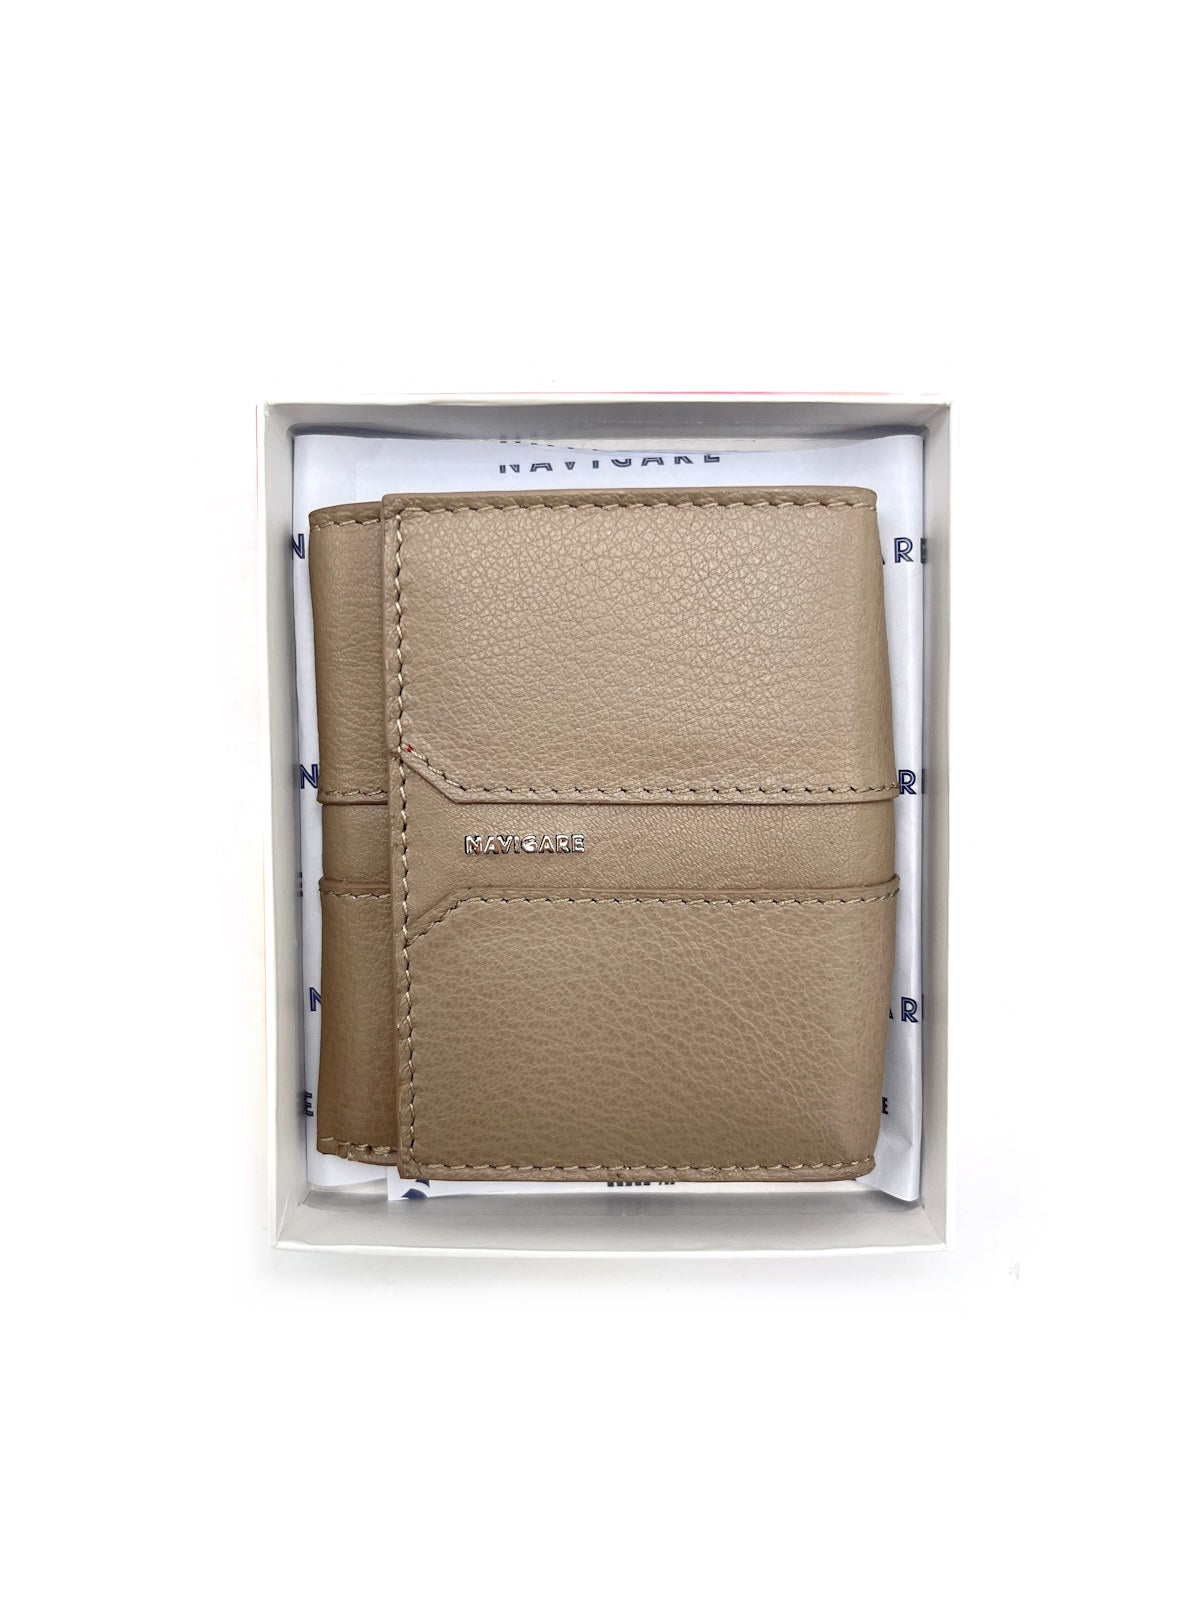 Genuine leather wallet, Navigare for women, art. PF790-81